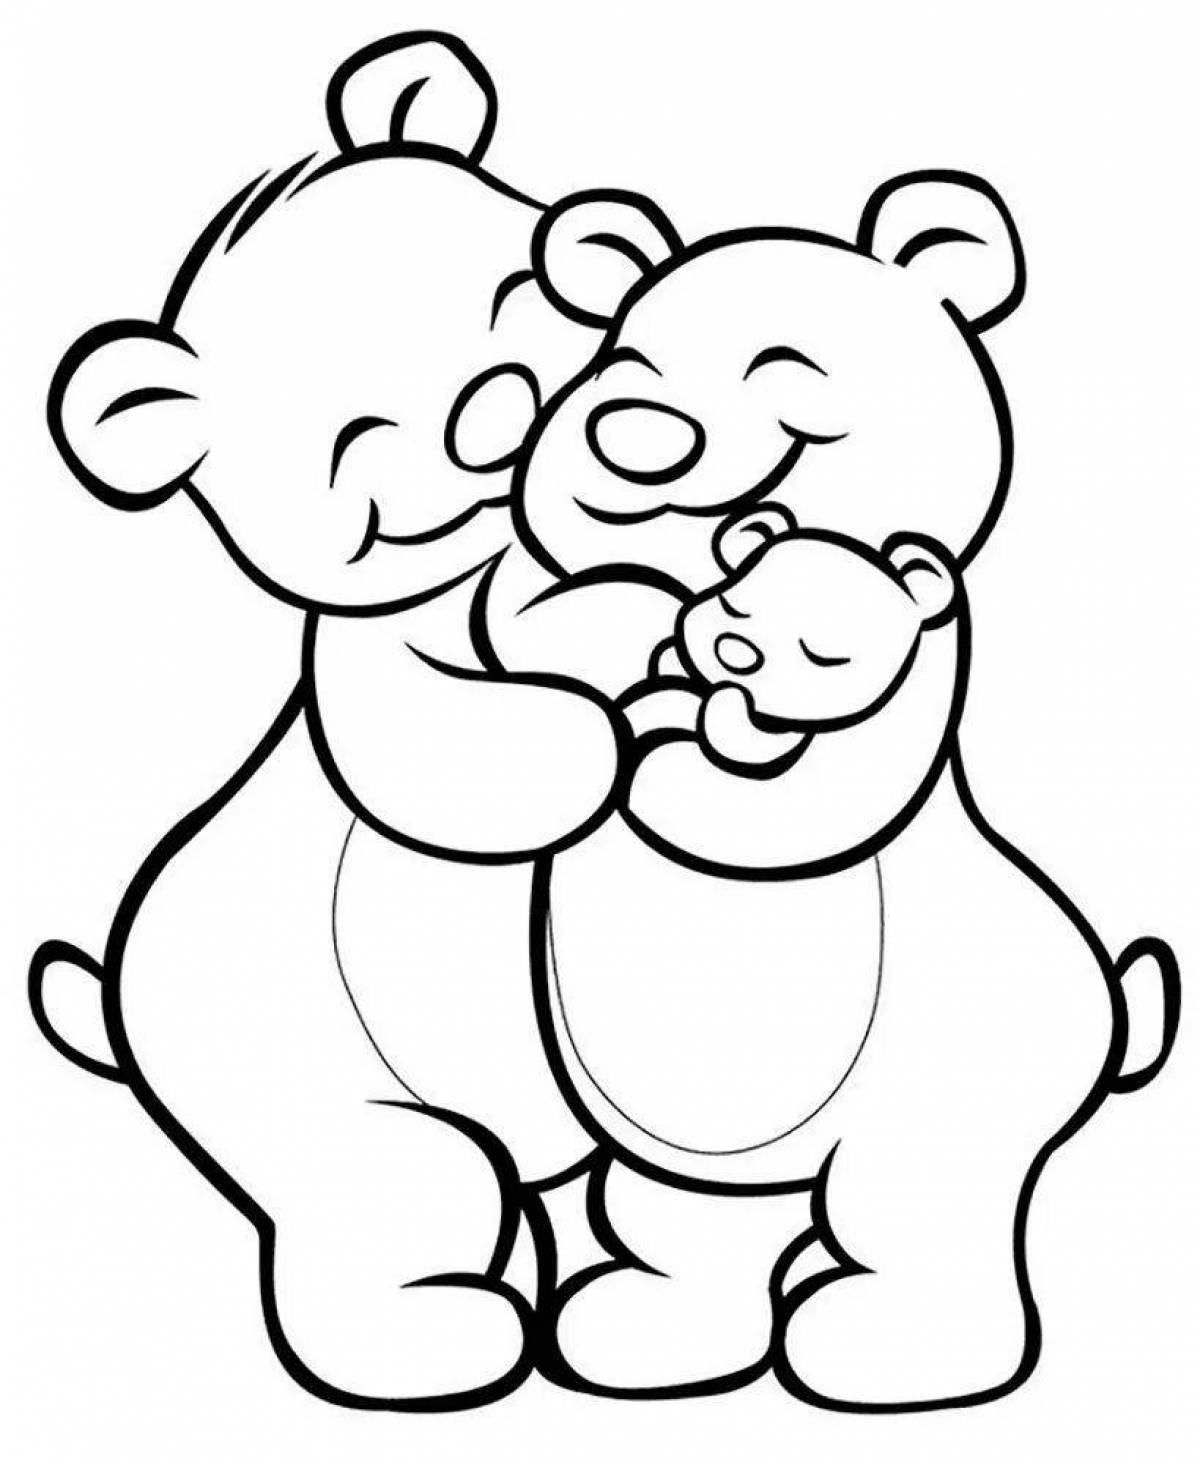 Children's hug day coloring pages